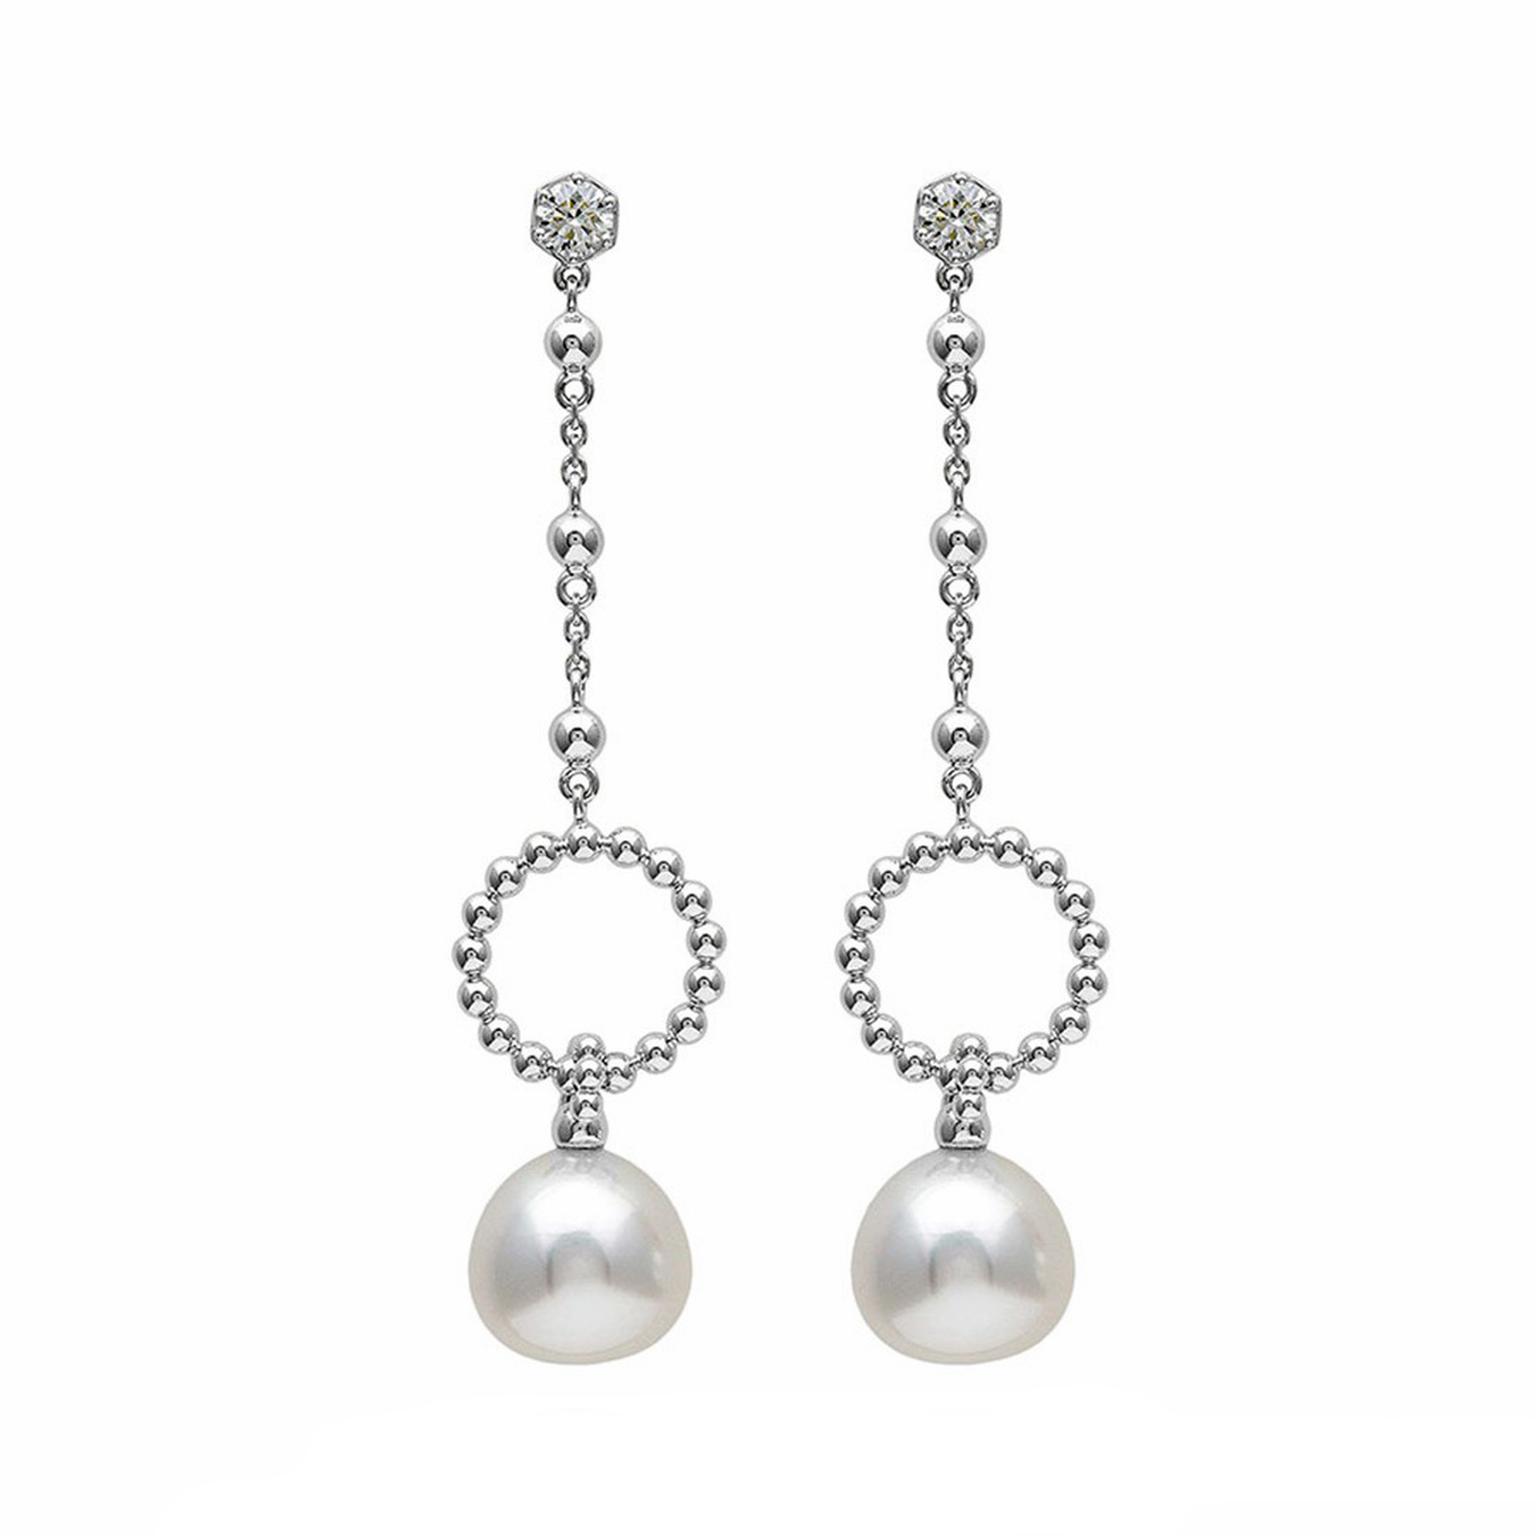 Boodles Circus diamond and pearl earrings